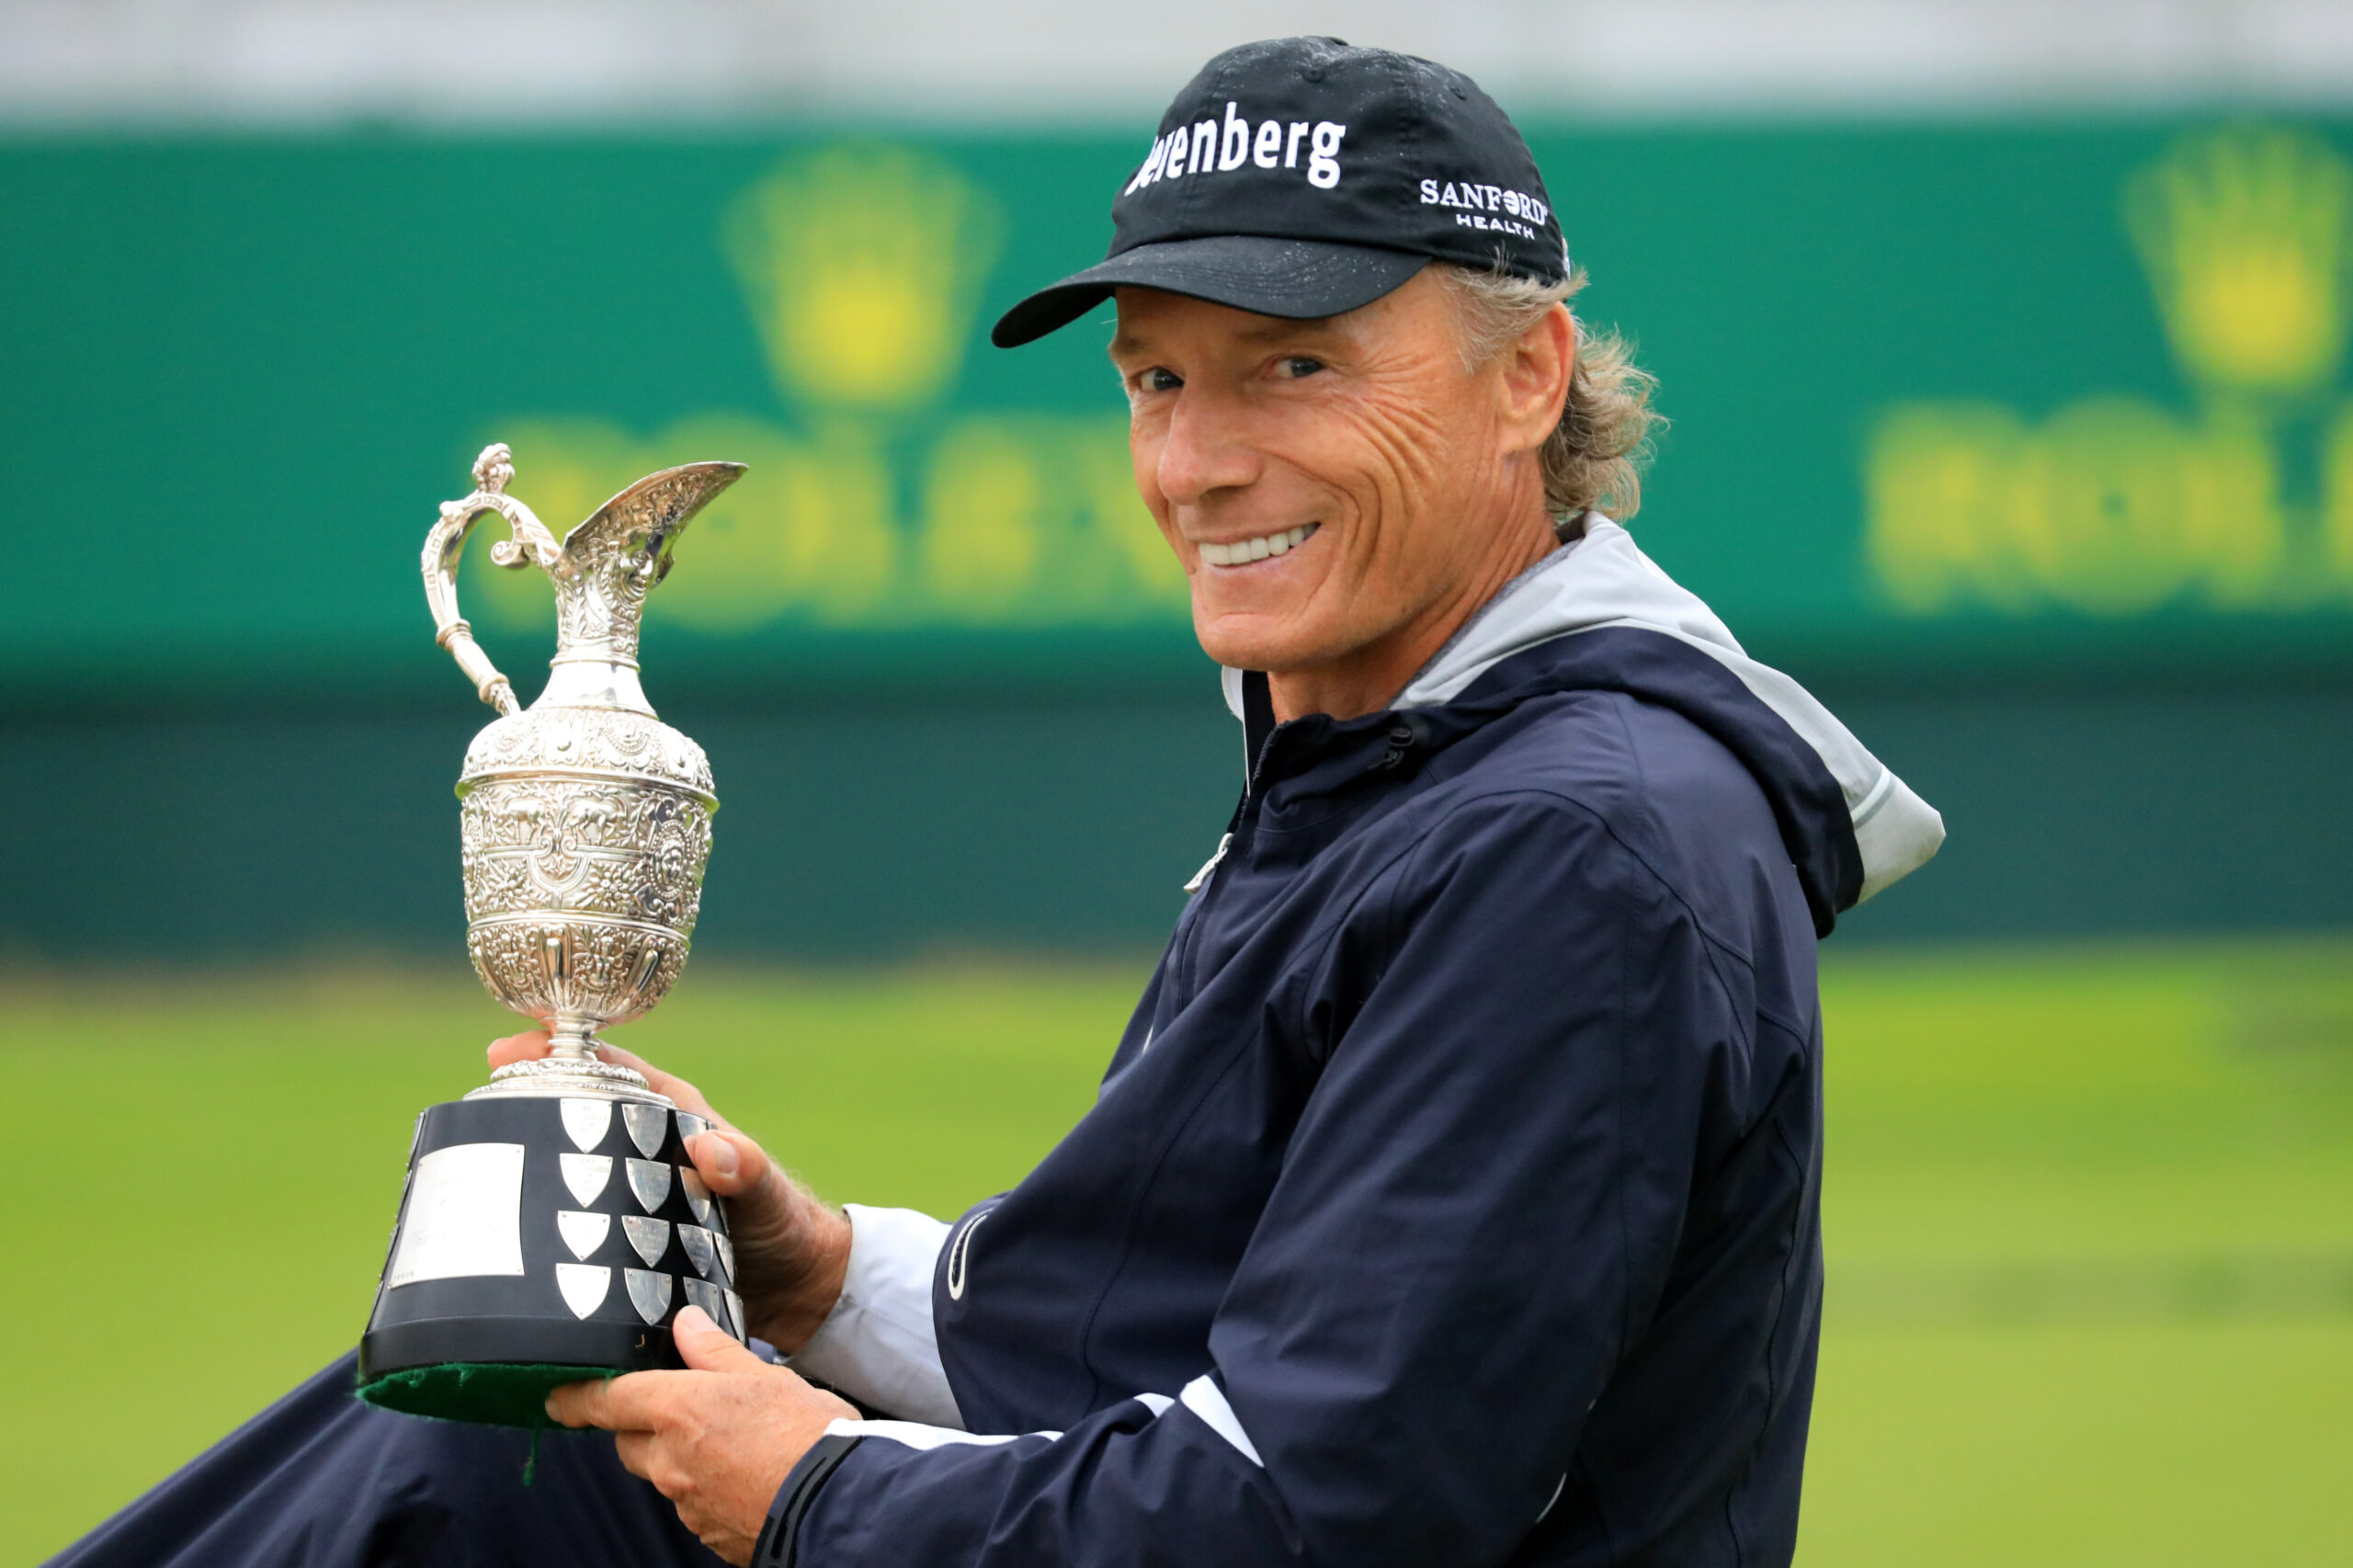 2019 The Senior Open Presented by Rolex – Day Four